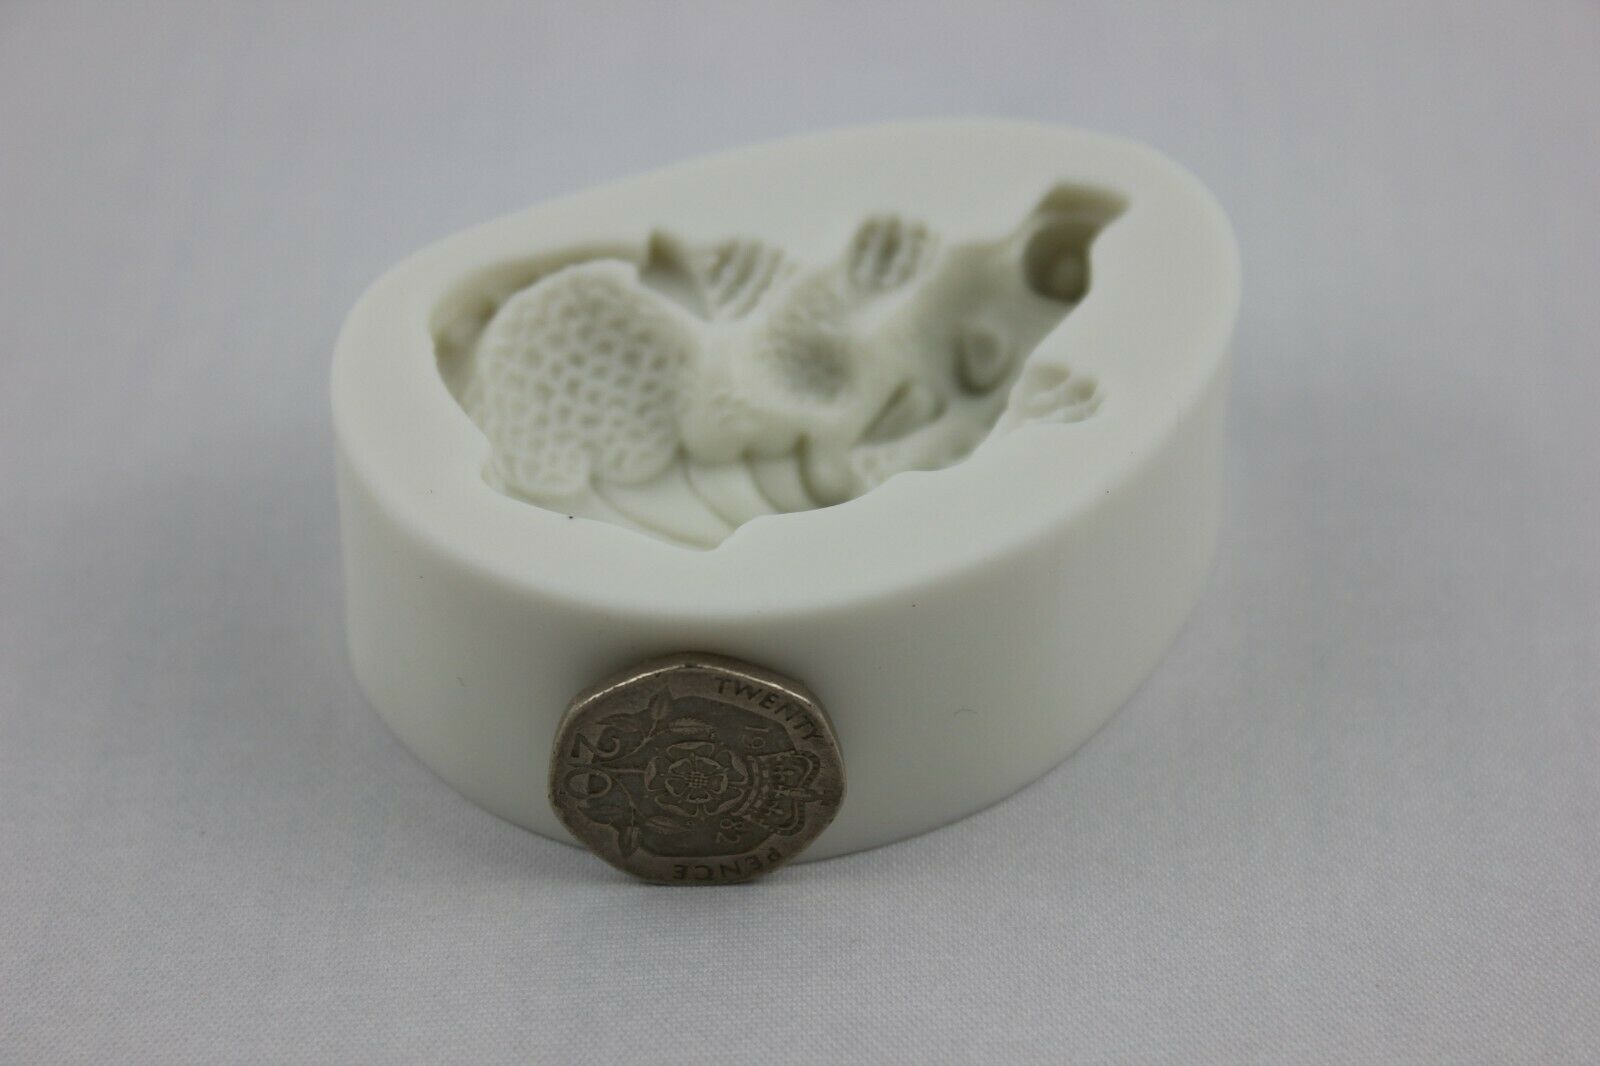 attachment-https://www.cupcakeaddicts.co.uk/wp-content/uploads/imported/2/Crouching-Dragon-Silicone-Mould-Resin-Icing-Fondant-Ice-Soap-Sugar-Craft-Melt-324684428982-3.jpg